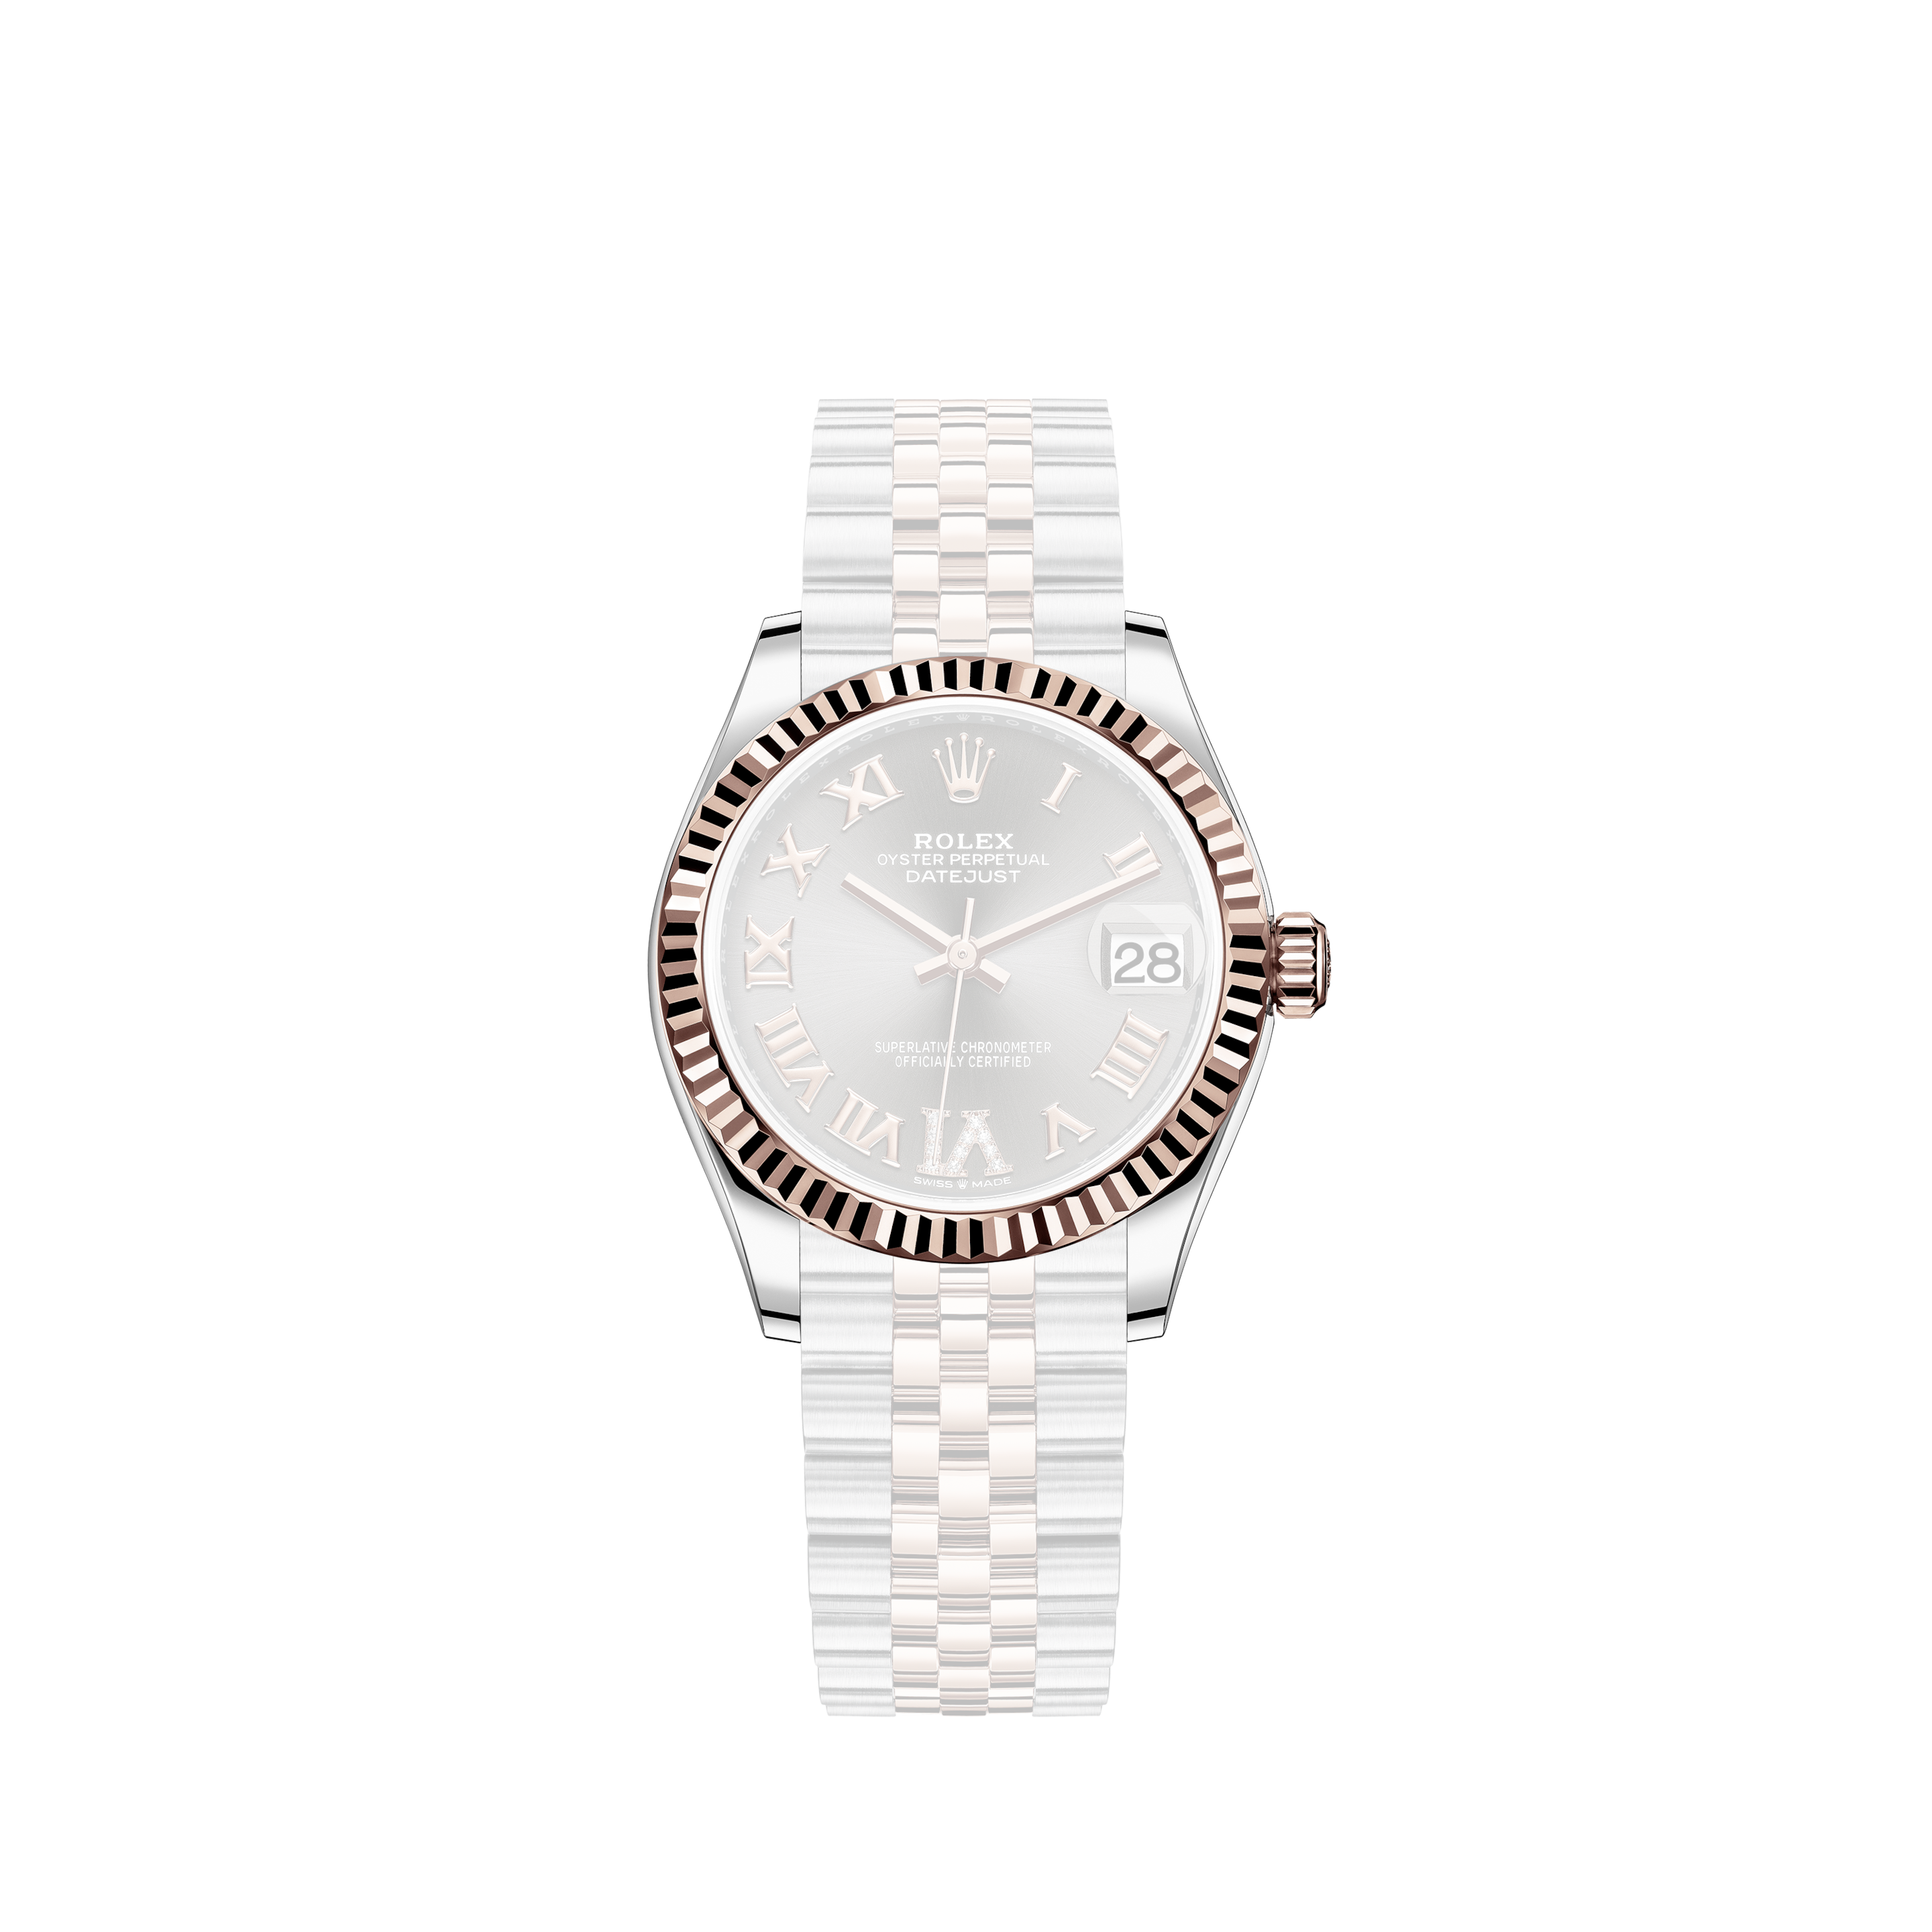 Rolex Men's Customized Rolex watch 36mm Datejust SS Glossy Pink Flower Dial with Diamond Accent